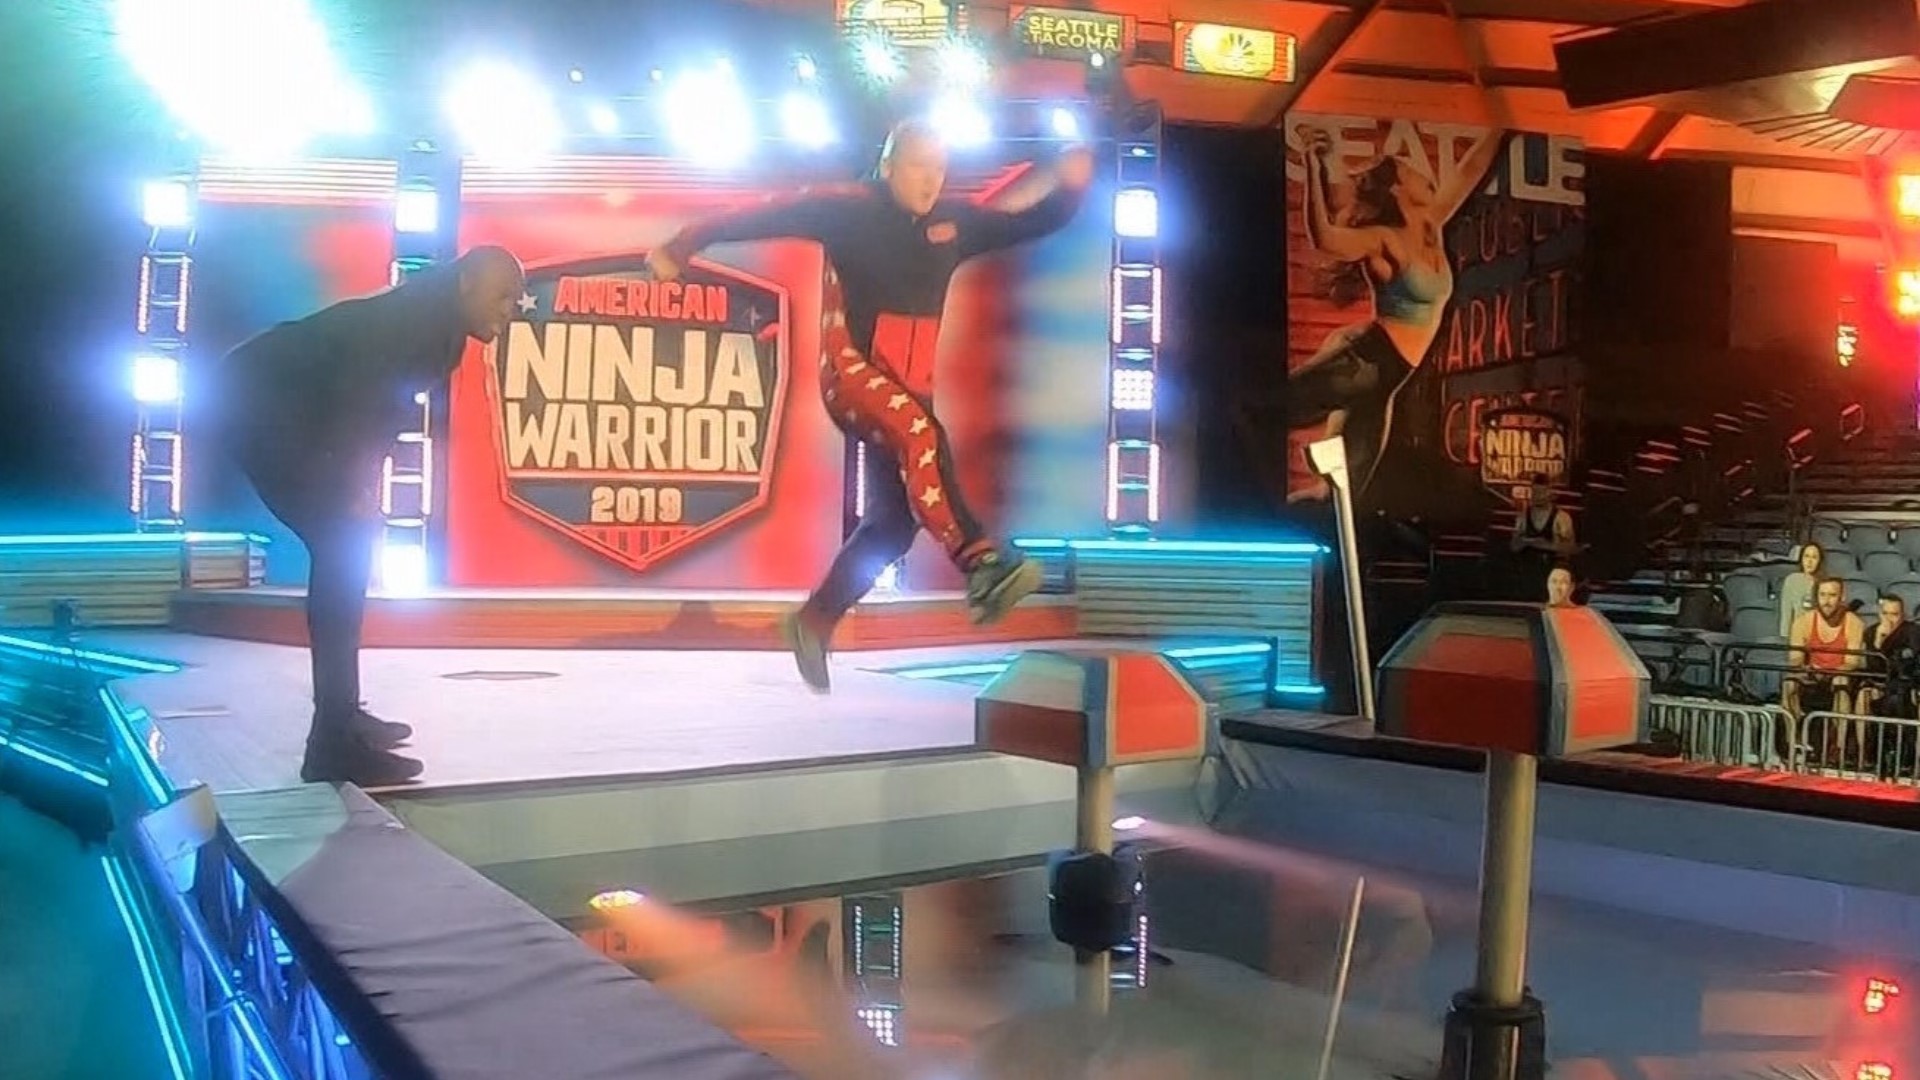 Ninja host dares Jim Dever to give it a try.